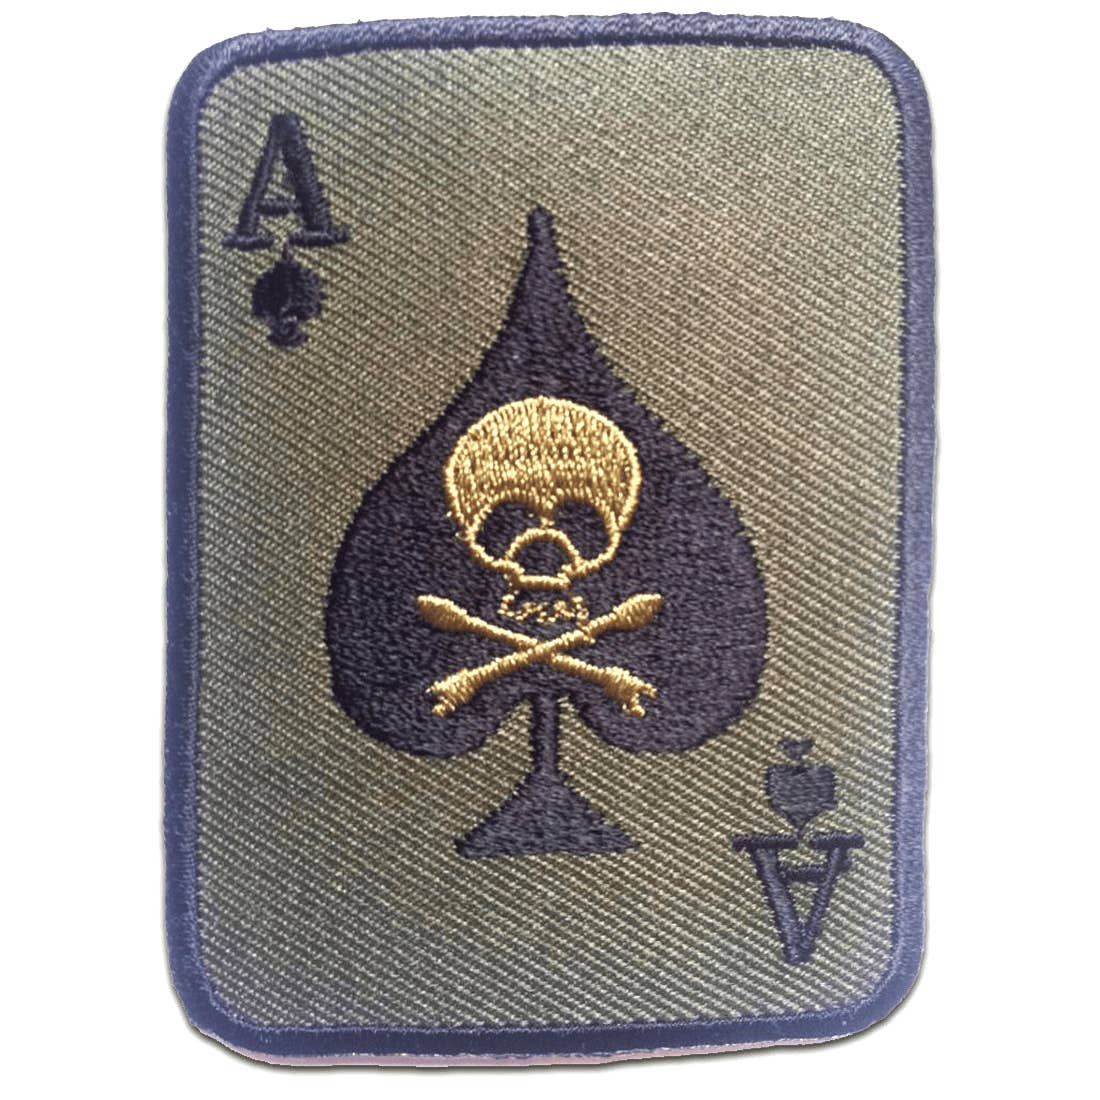 Ace of Spades Skull and Cross bones Patch